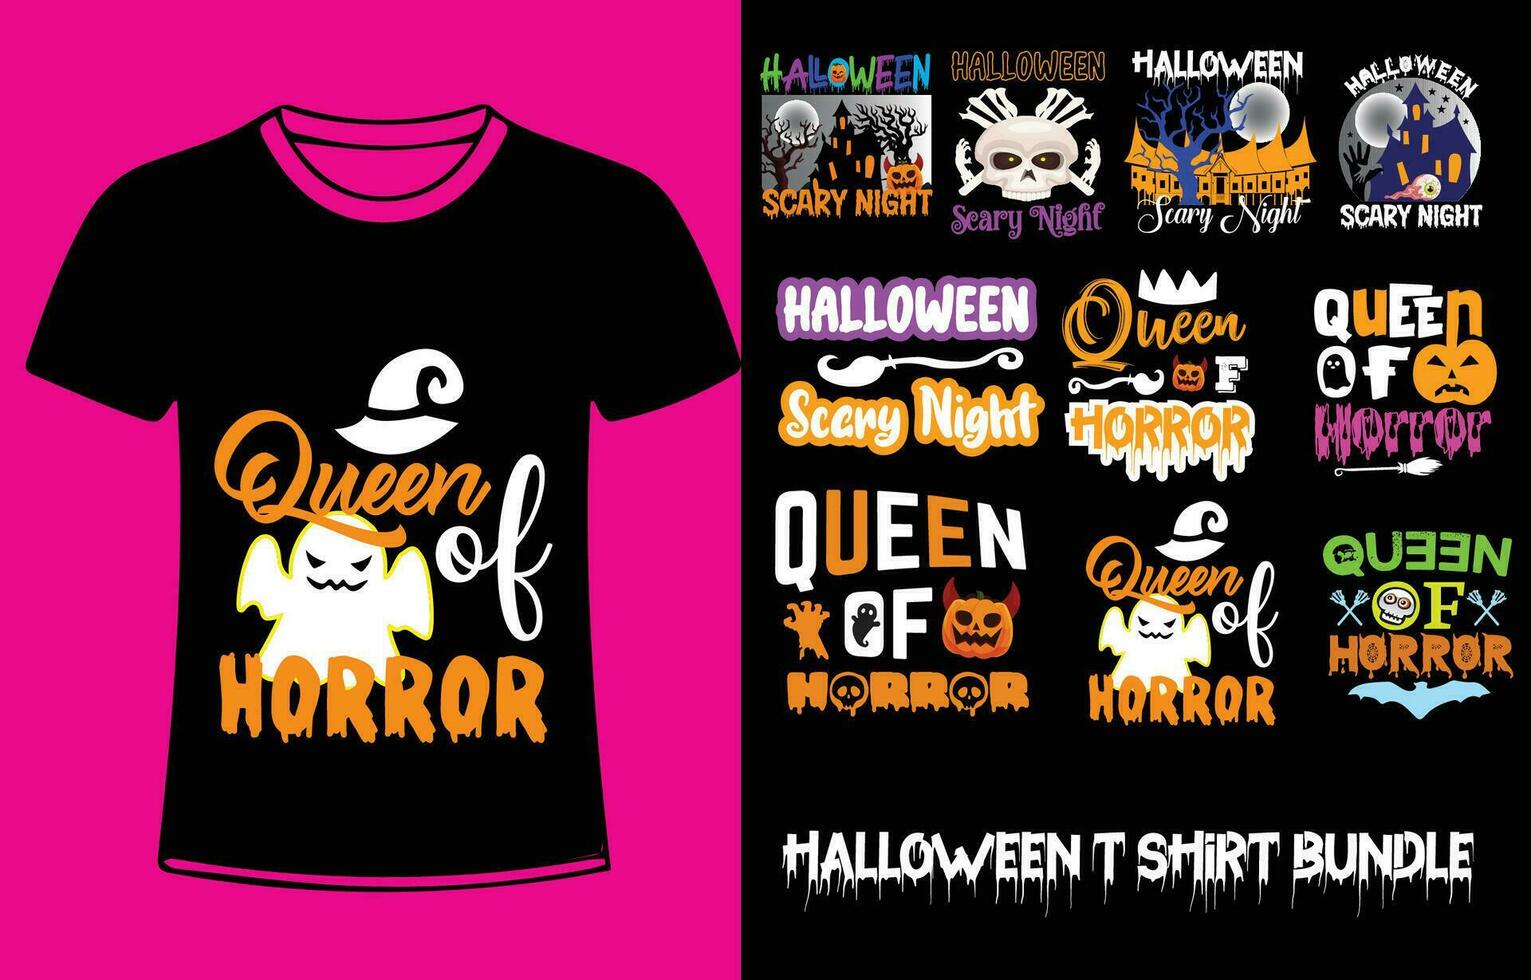 Halloween quote new t shirt design for t-shirt, cards, frame artwork, bags, mugs, stickers, tumblers, phone cases, print etc. vector